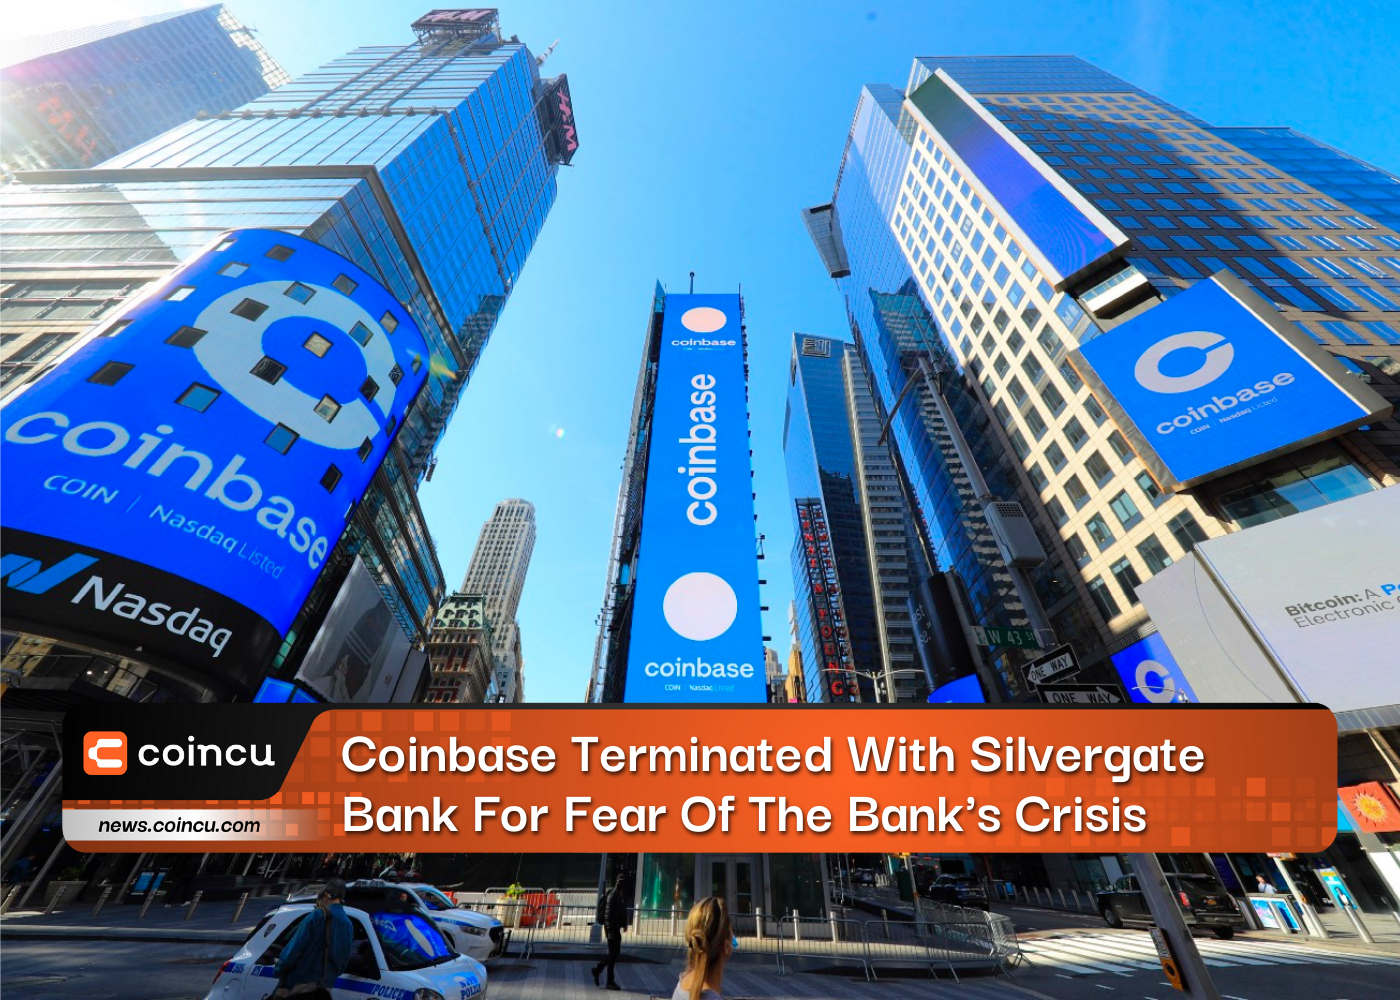 Coinbase Terminated With Silvergate Bank For Fear Of The Bank's Crisis